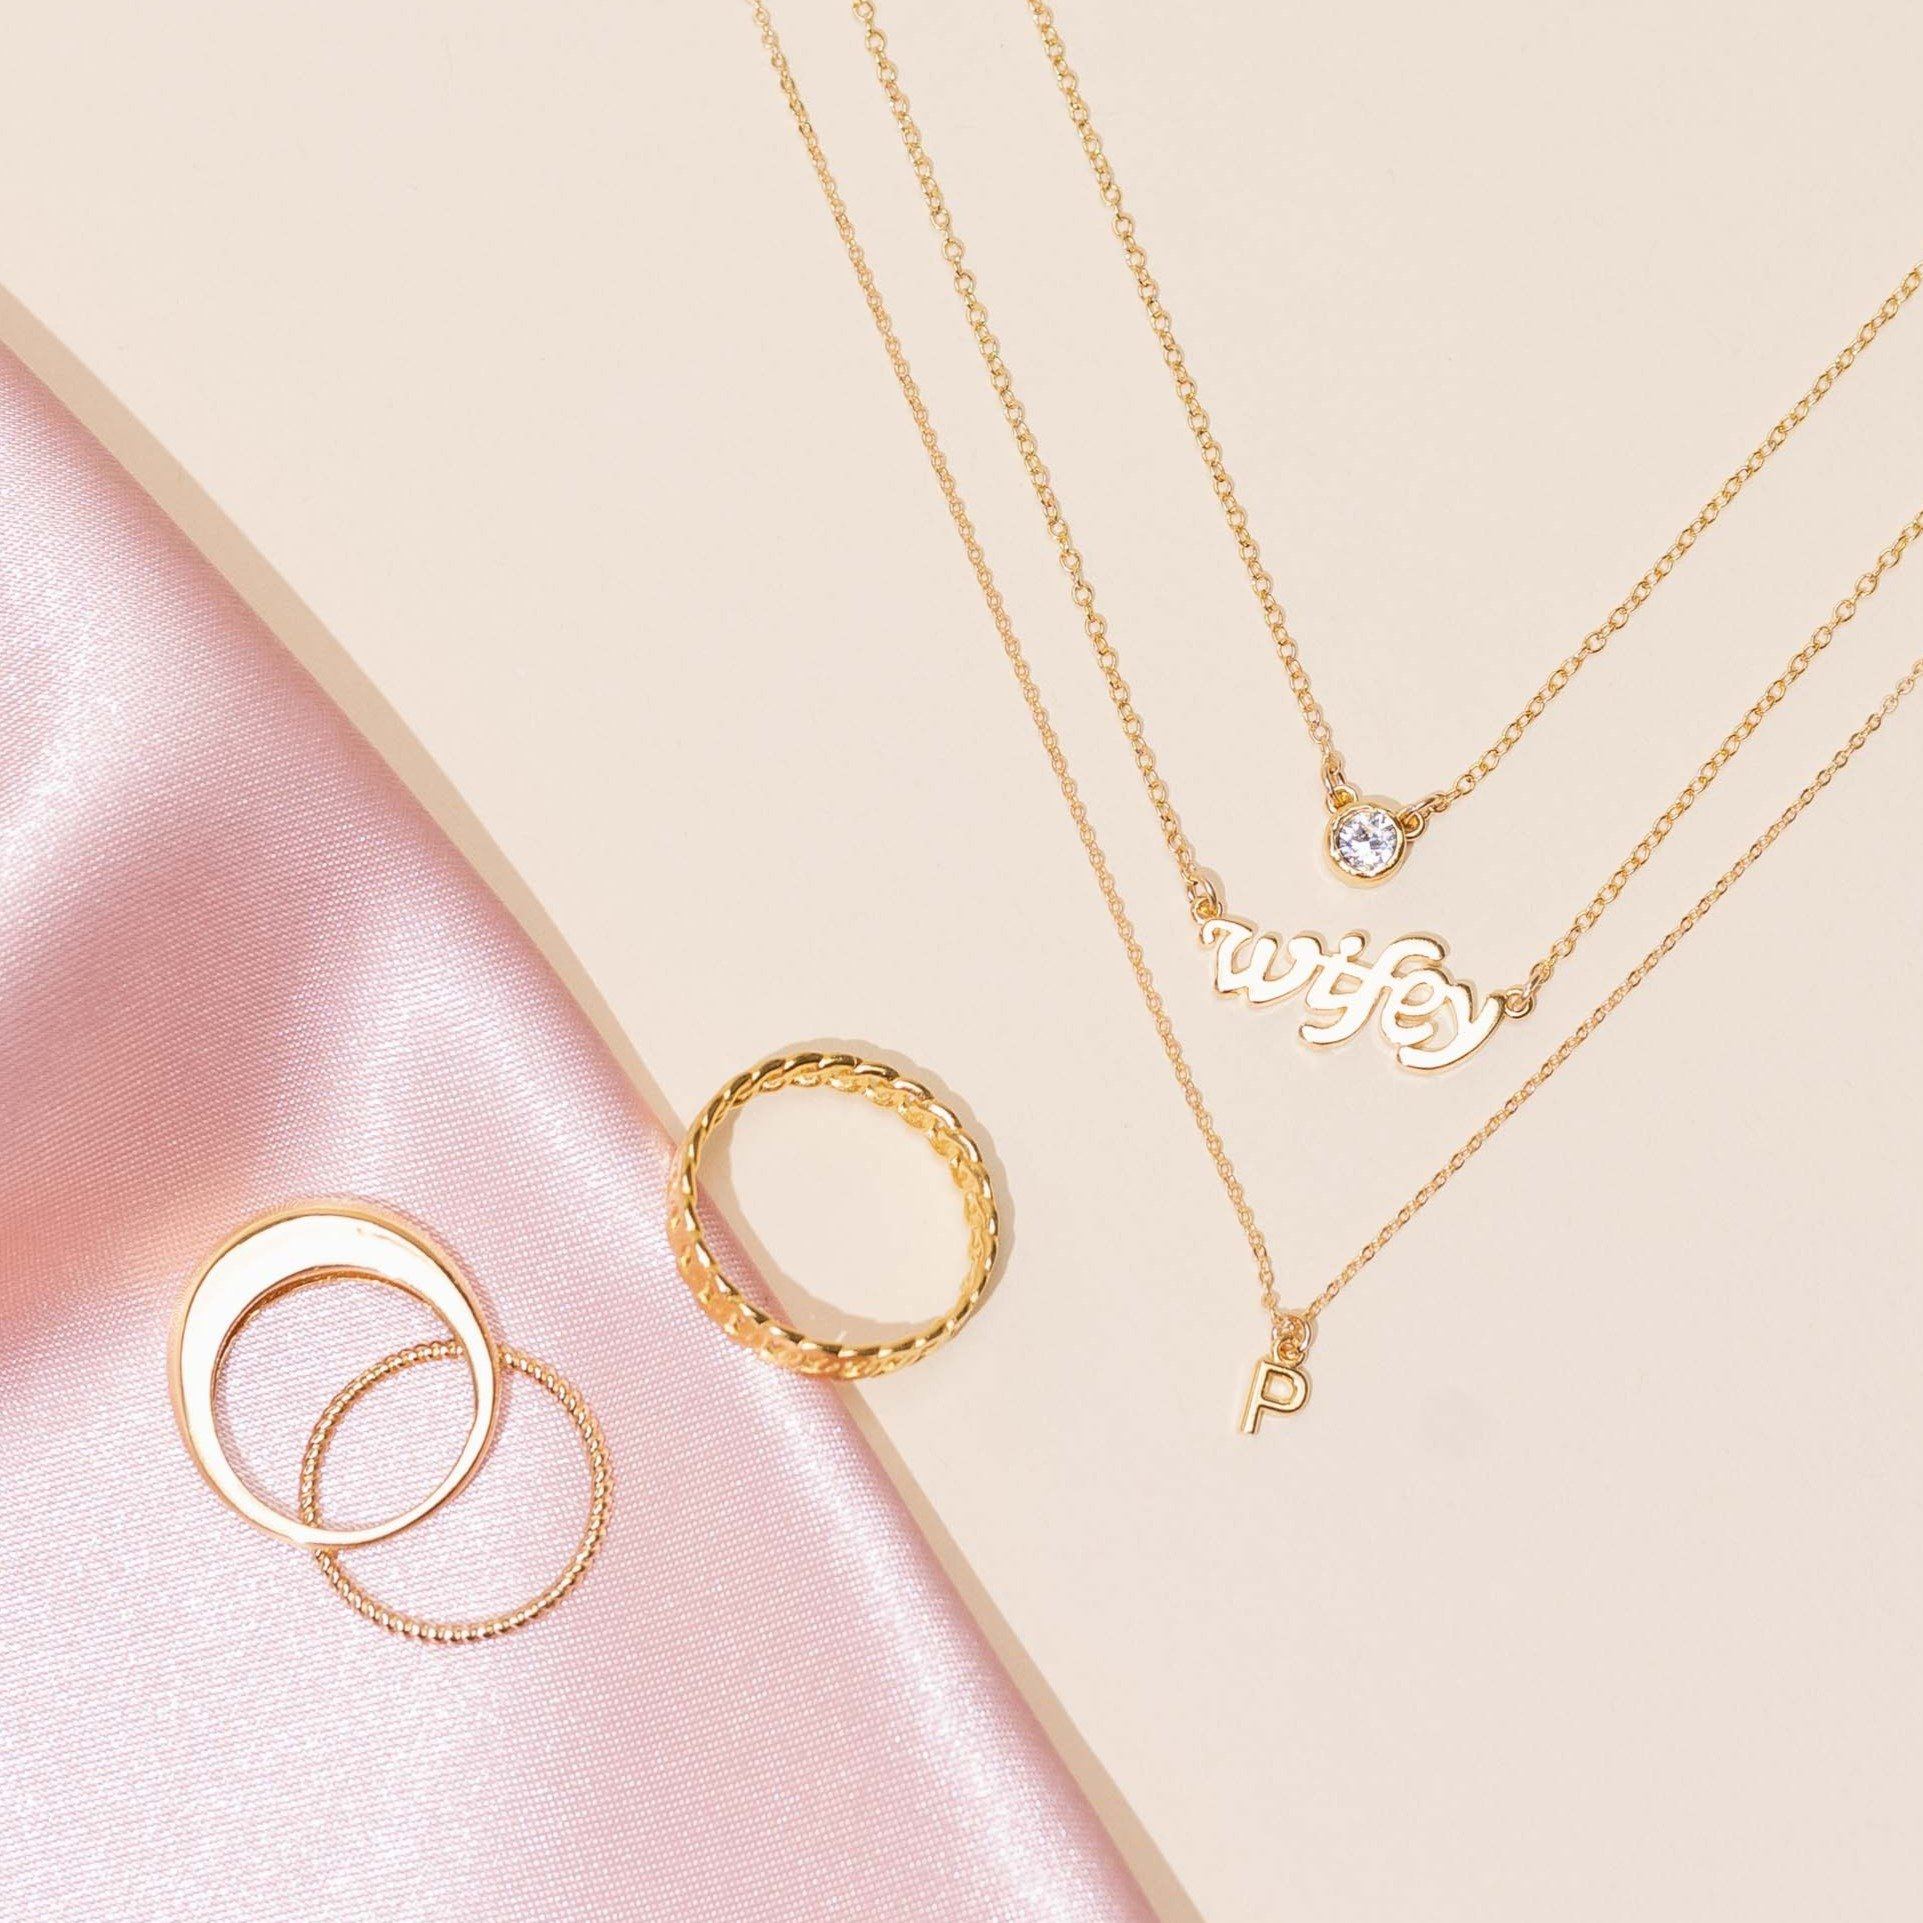 Dainty gold Wifey Necklace layered with a gold Birthstone Necklace and Initial Necklace, handmade in America by Katie Dean Jewelry